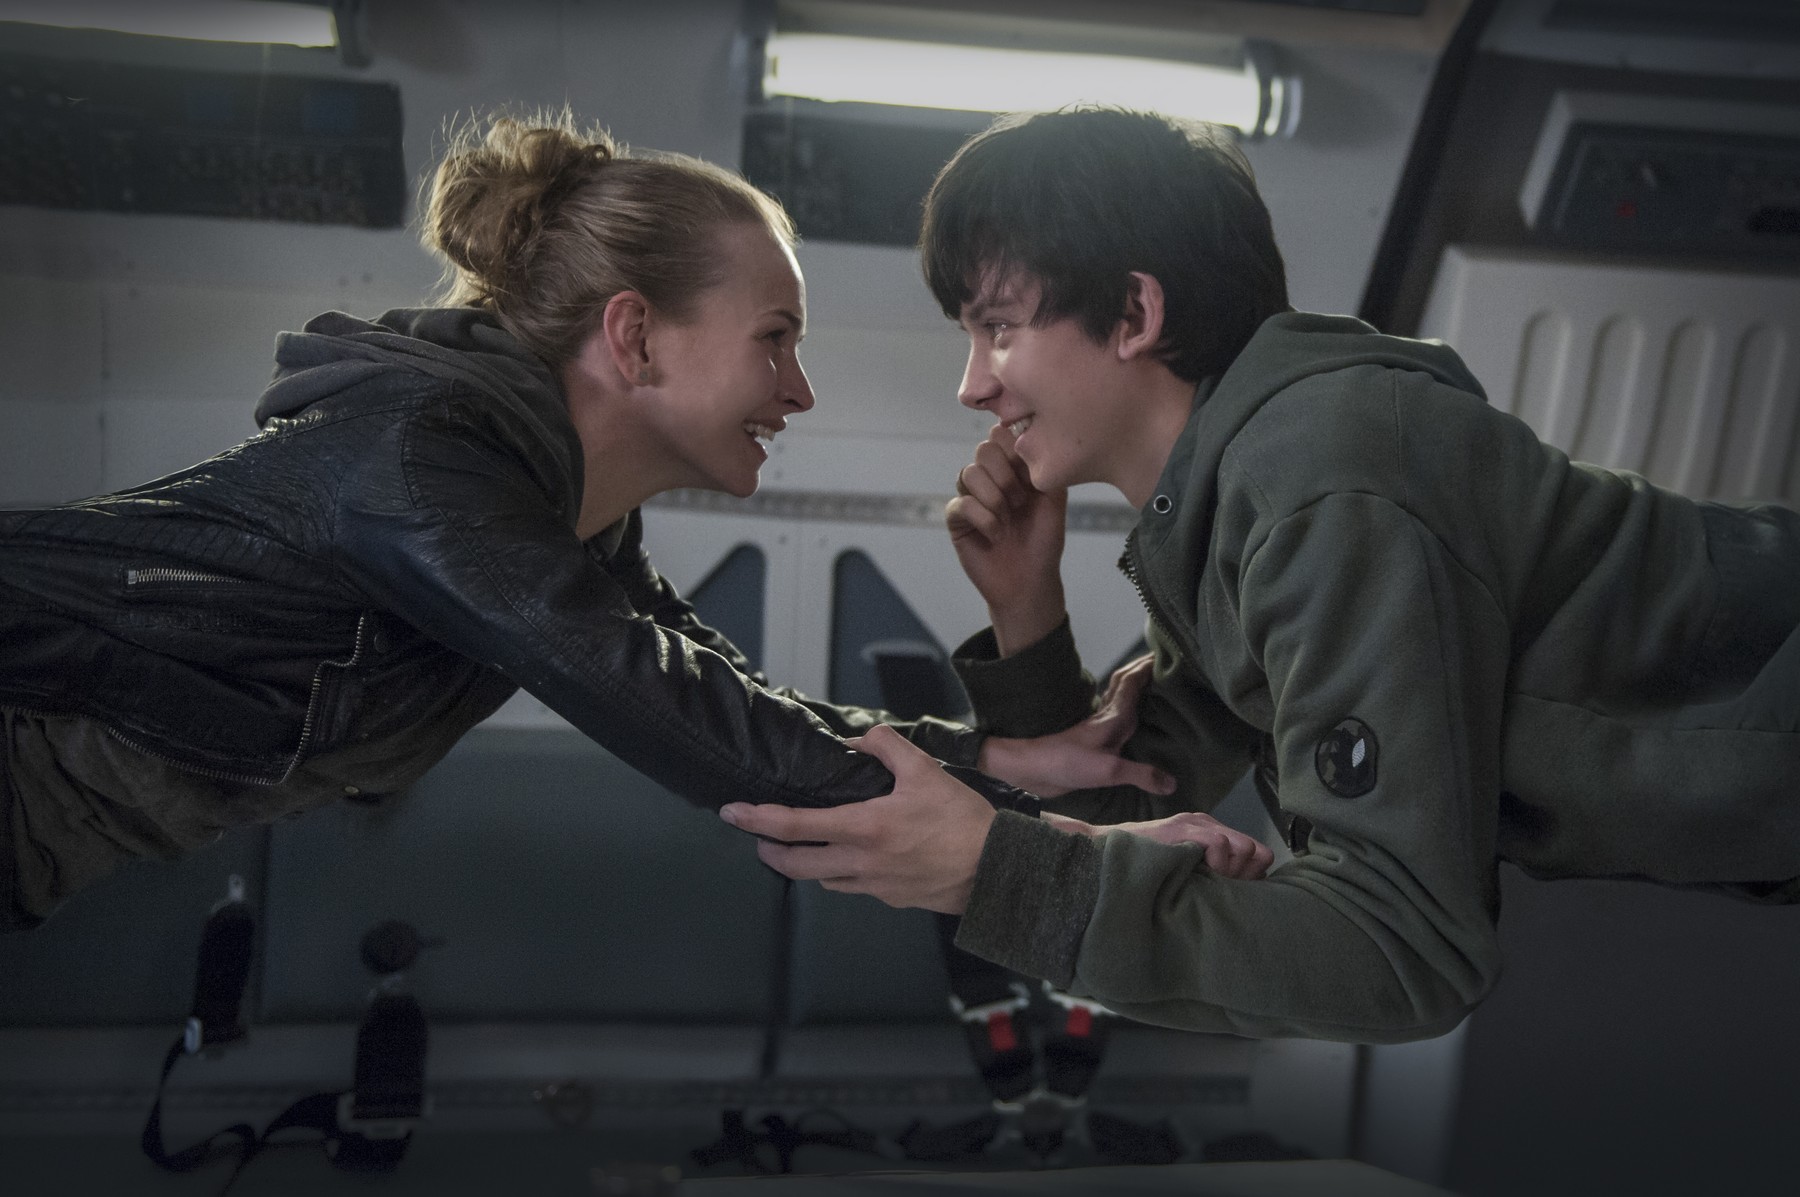 Review for the new Sci-Fi Romance THE SPACE BETWEEN US, opening in theatres February 3rd 2017. | Review for the new Sci-Fi Romance THE SPACE BETWEEN US, opening in theatres February 3rd 2017.